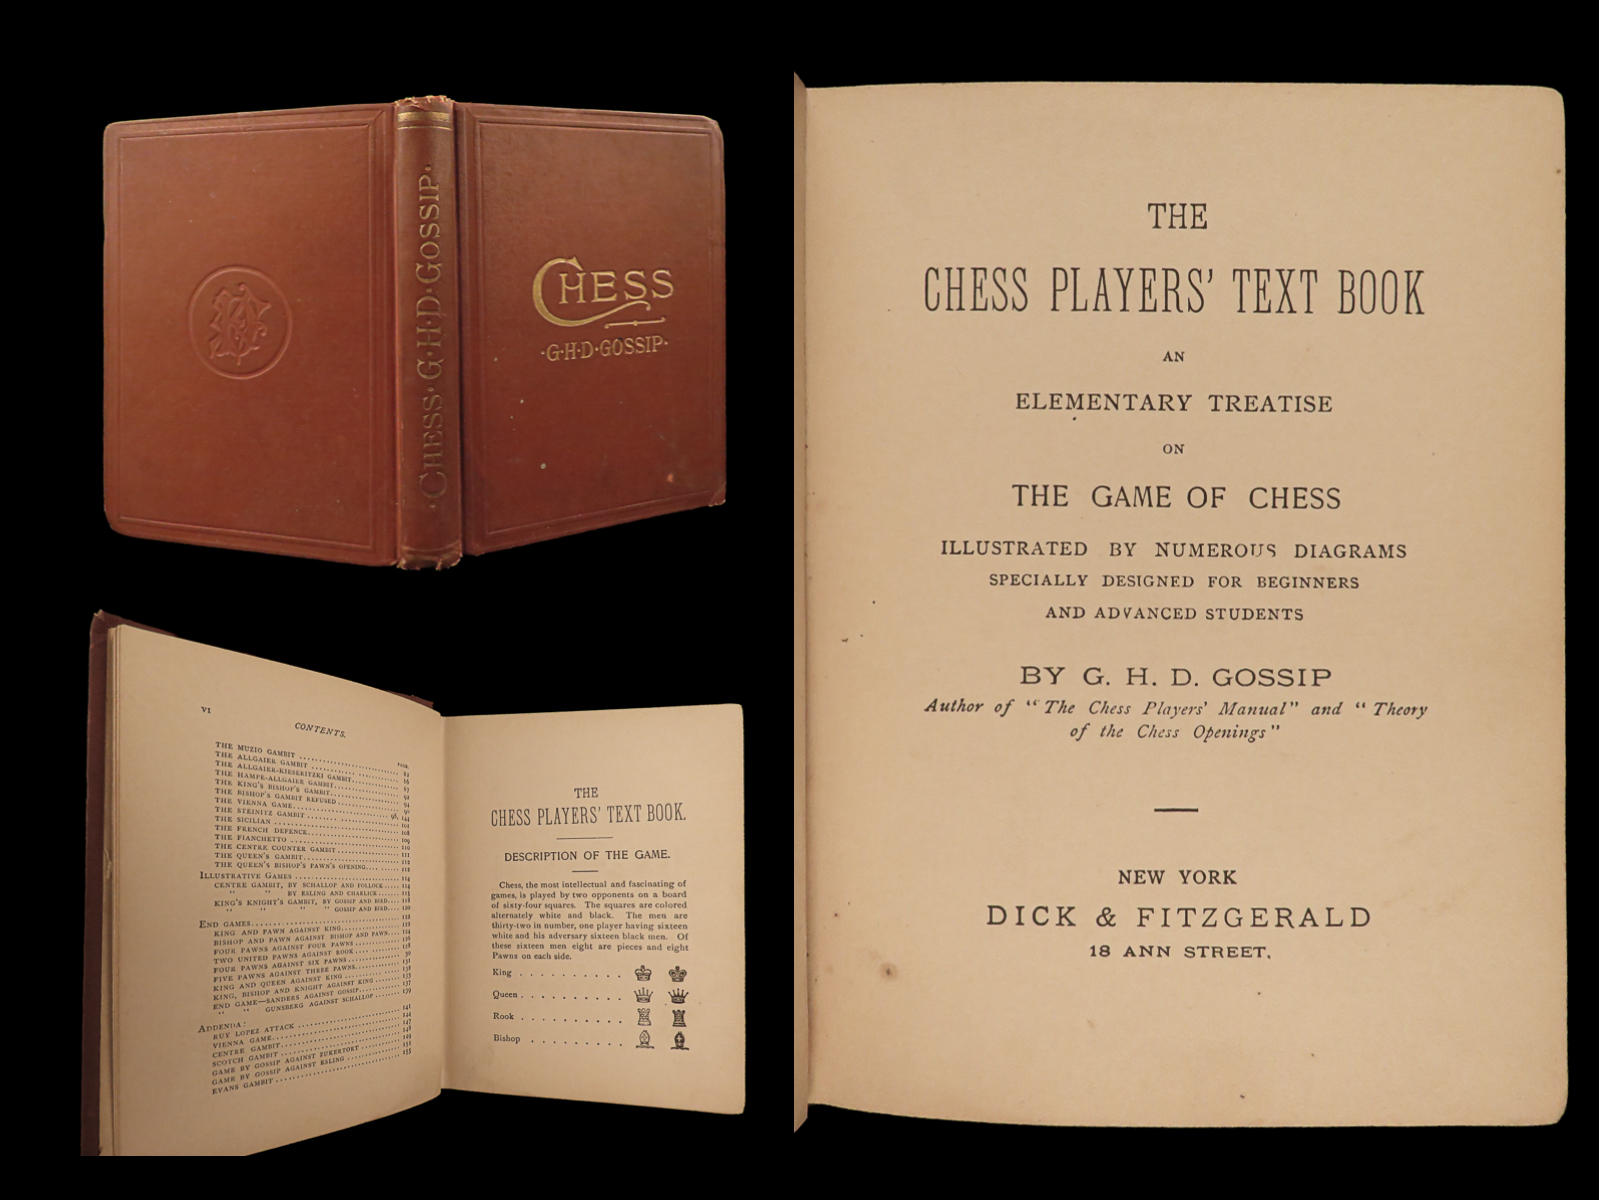 The Chess Players Text Book: An Elementary Treatise on the Game of Chess.  Illustrated by Numerous Diagrams Specially Designed for Beginners and  Advanced Students. by GOSSIP, G.H.D.: Near Fine Hardcover (1889) 1st